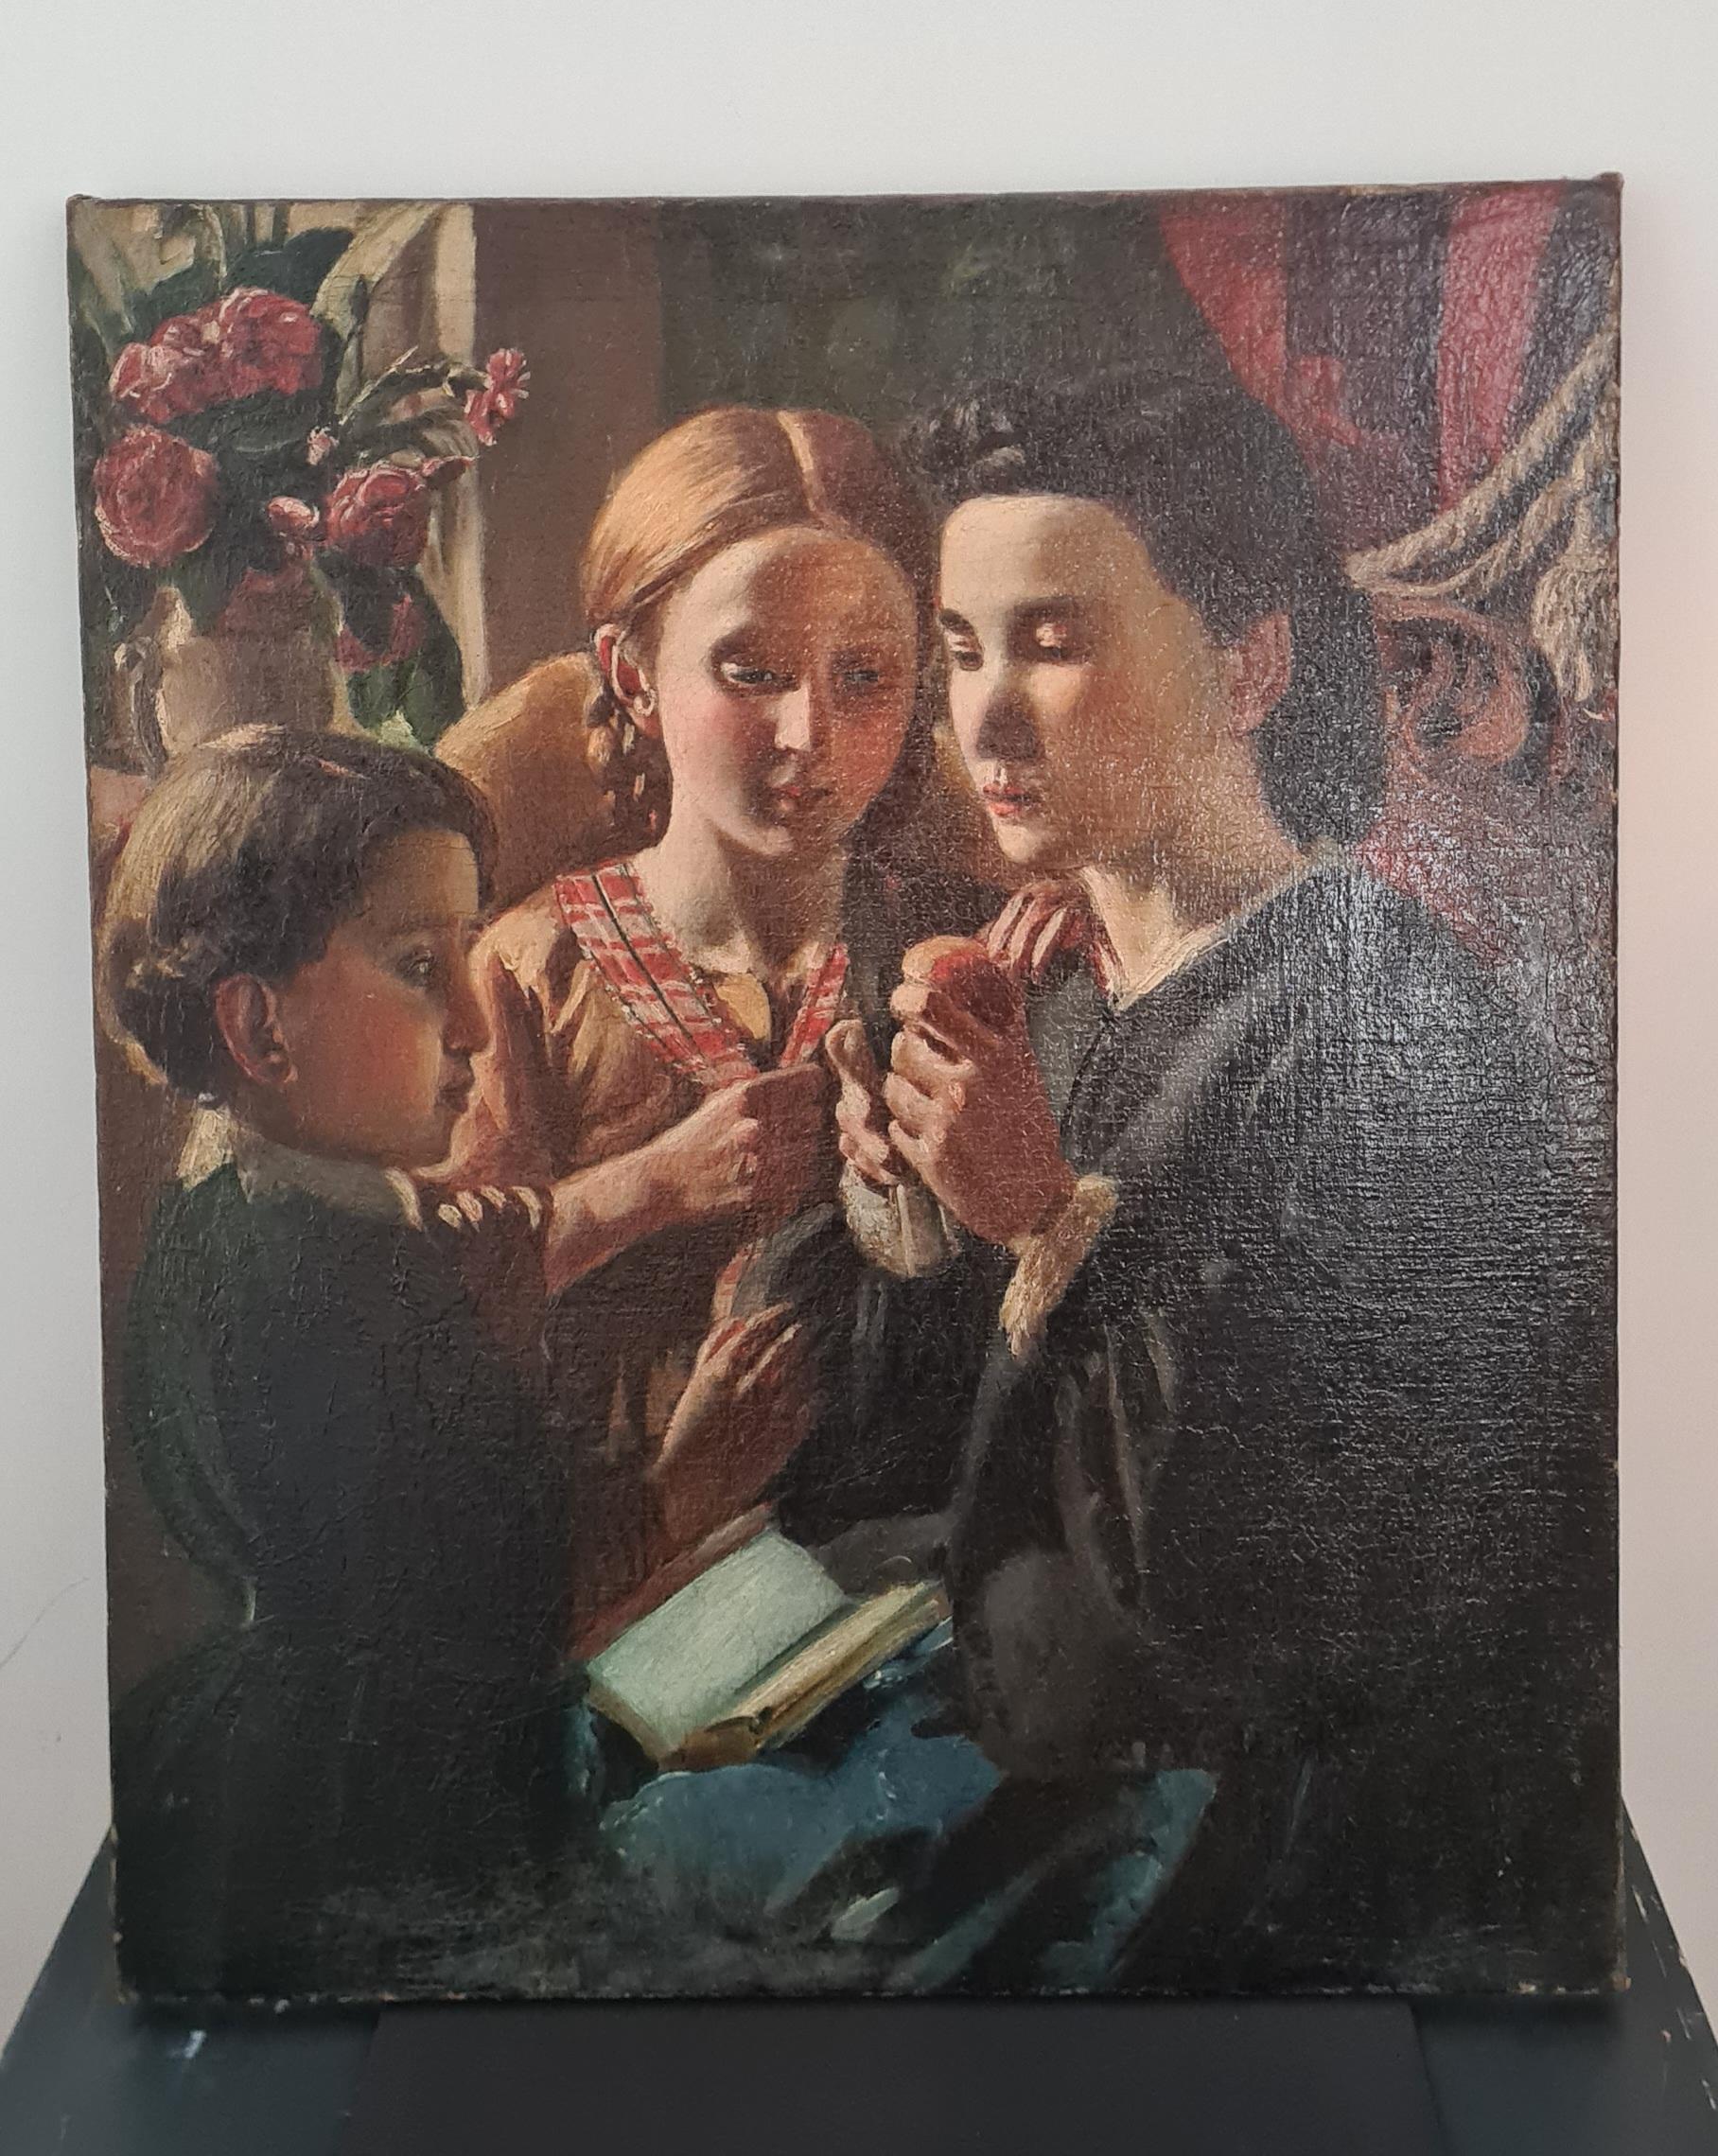 Art deco genre scene painting.

Art deco-style genre scene depicting in the foreground a woman probably a guardian a intent on cutting an apple to give to a typical child of the 1920s/30s.

Behind the two characters in the foreground is a young